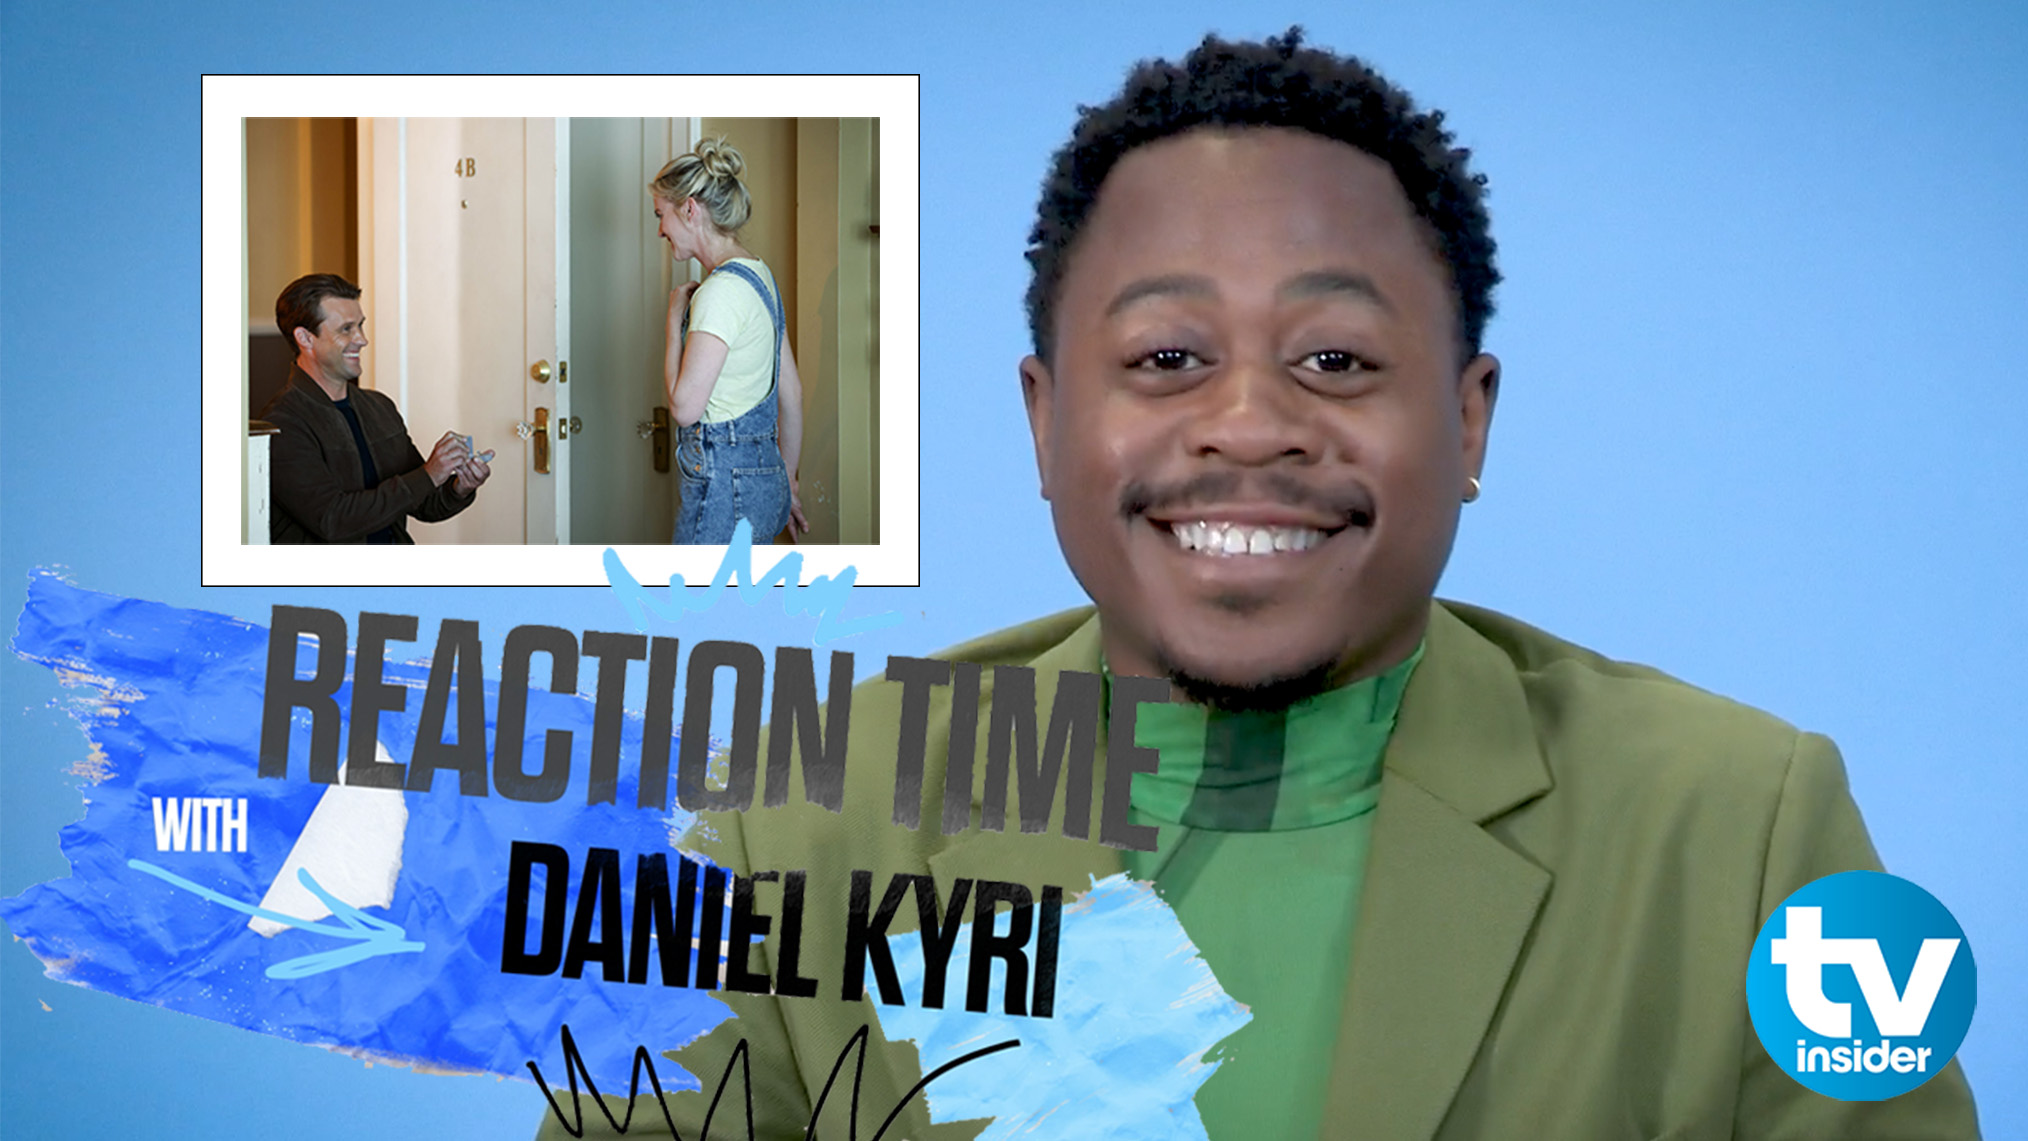 daniel kyri hilariously reacts to moments from season 11 (video)